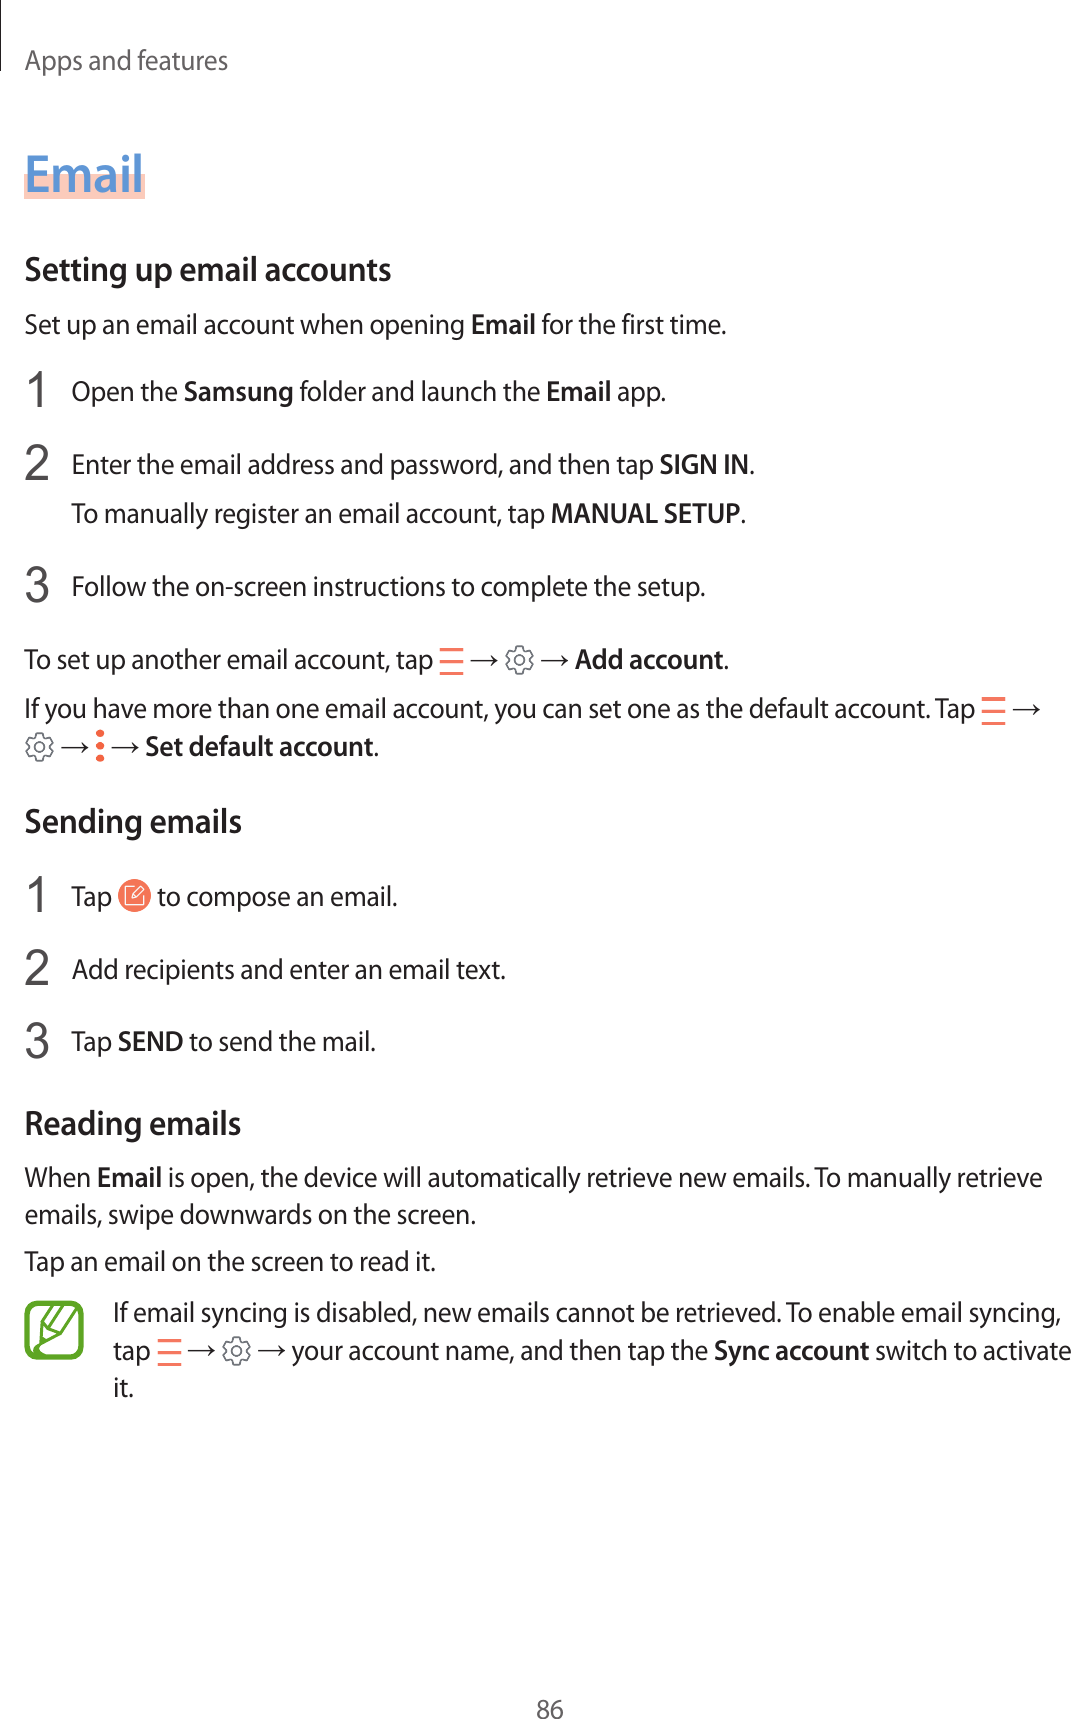 Apps and features86EmailSetting up email accountsSet up an email account when opening Email for the first time.1  Open the Samsung folder and launch the Email app.2  Enter the email address and password, and then tap SIGN IN.To manually register an email account, tap MANUAL SETUP.3  Follow the on-screen instructions to complete the setup.To set up another email account, tap   →   → Add account.If you have more than one email account, you can set one as the default account. Tap   →  →   → Set default account.Sending emails1  Tap   to compose an email.2  Add recipients and enter an email text.3  Tap SEND to send the mail.Reading emailsWhen Email is open, the device will automatically retrieve new emails. To manually retrieve emails, swipe downwards on the screen.Tap an email on the screen to read it.If email syncing is disabled, new emails cannot be retrieved. To enable email syncing, tap   →   → your account name, and then tap the Sync account switch to activate it.